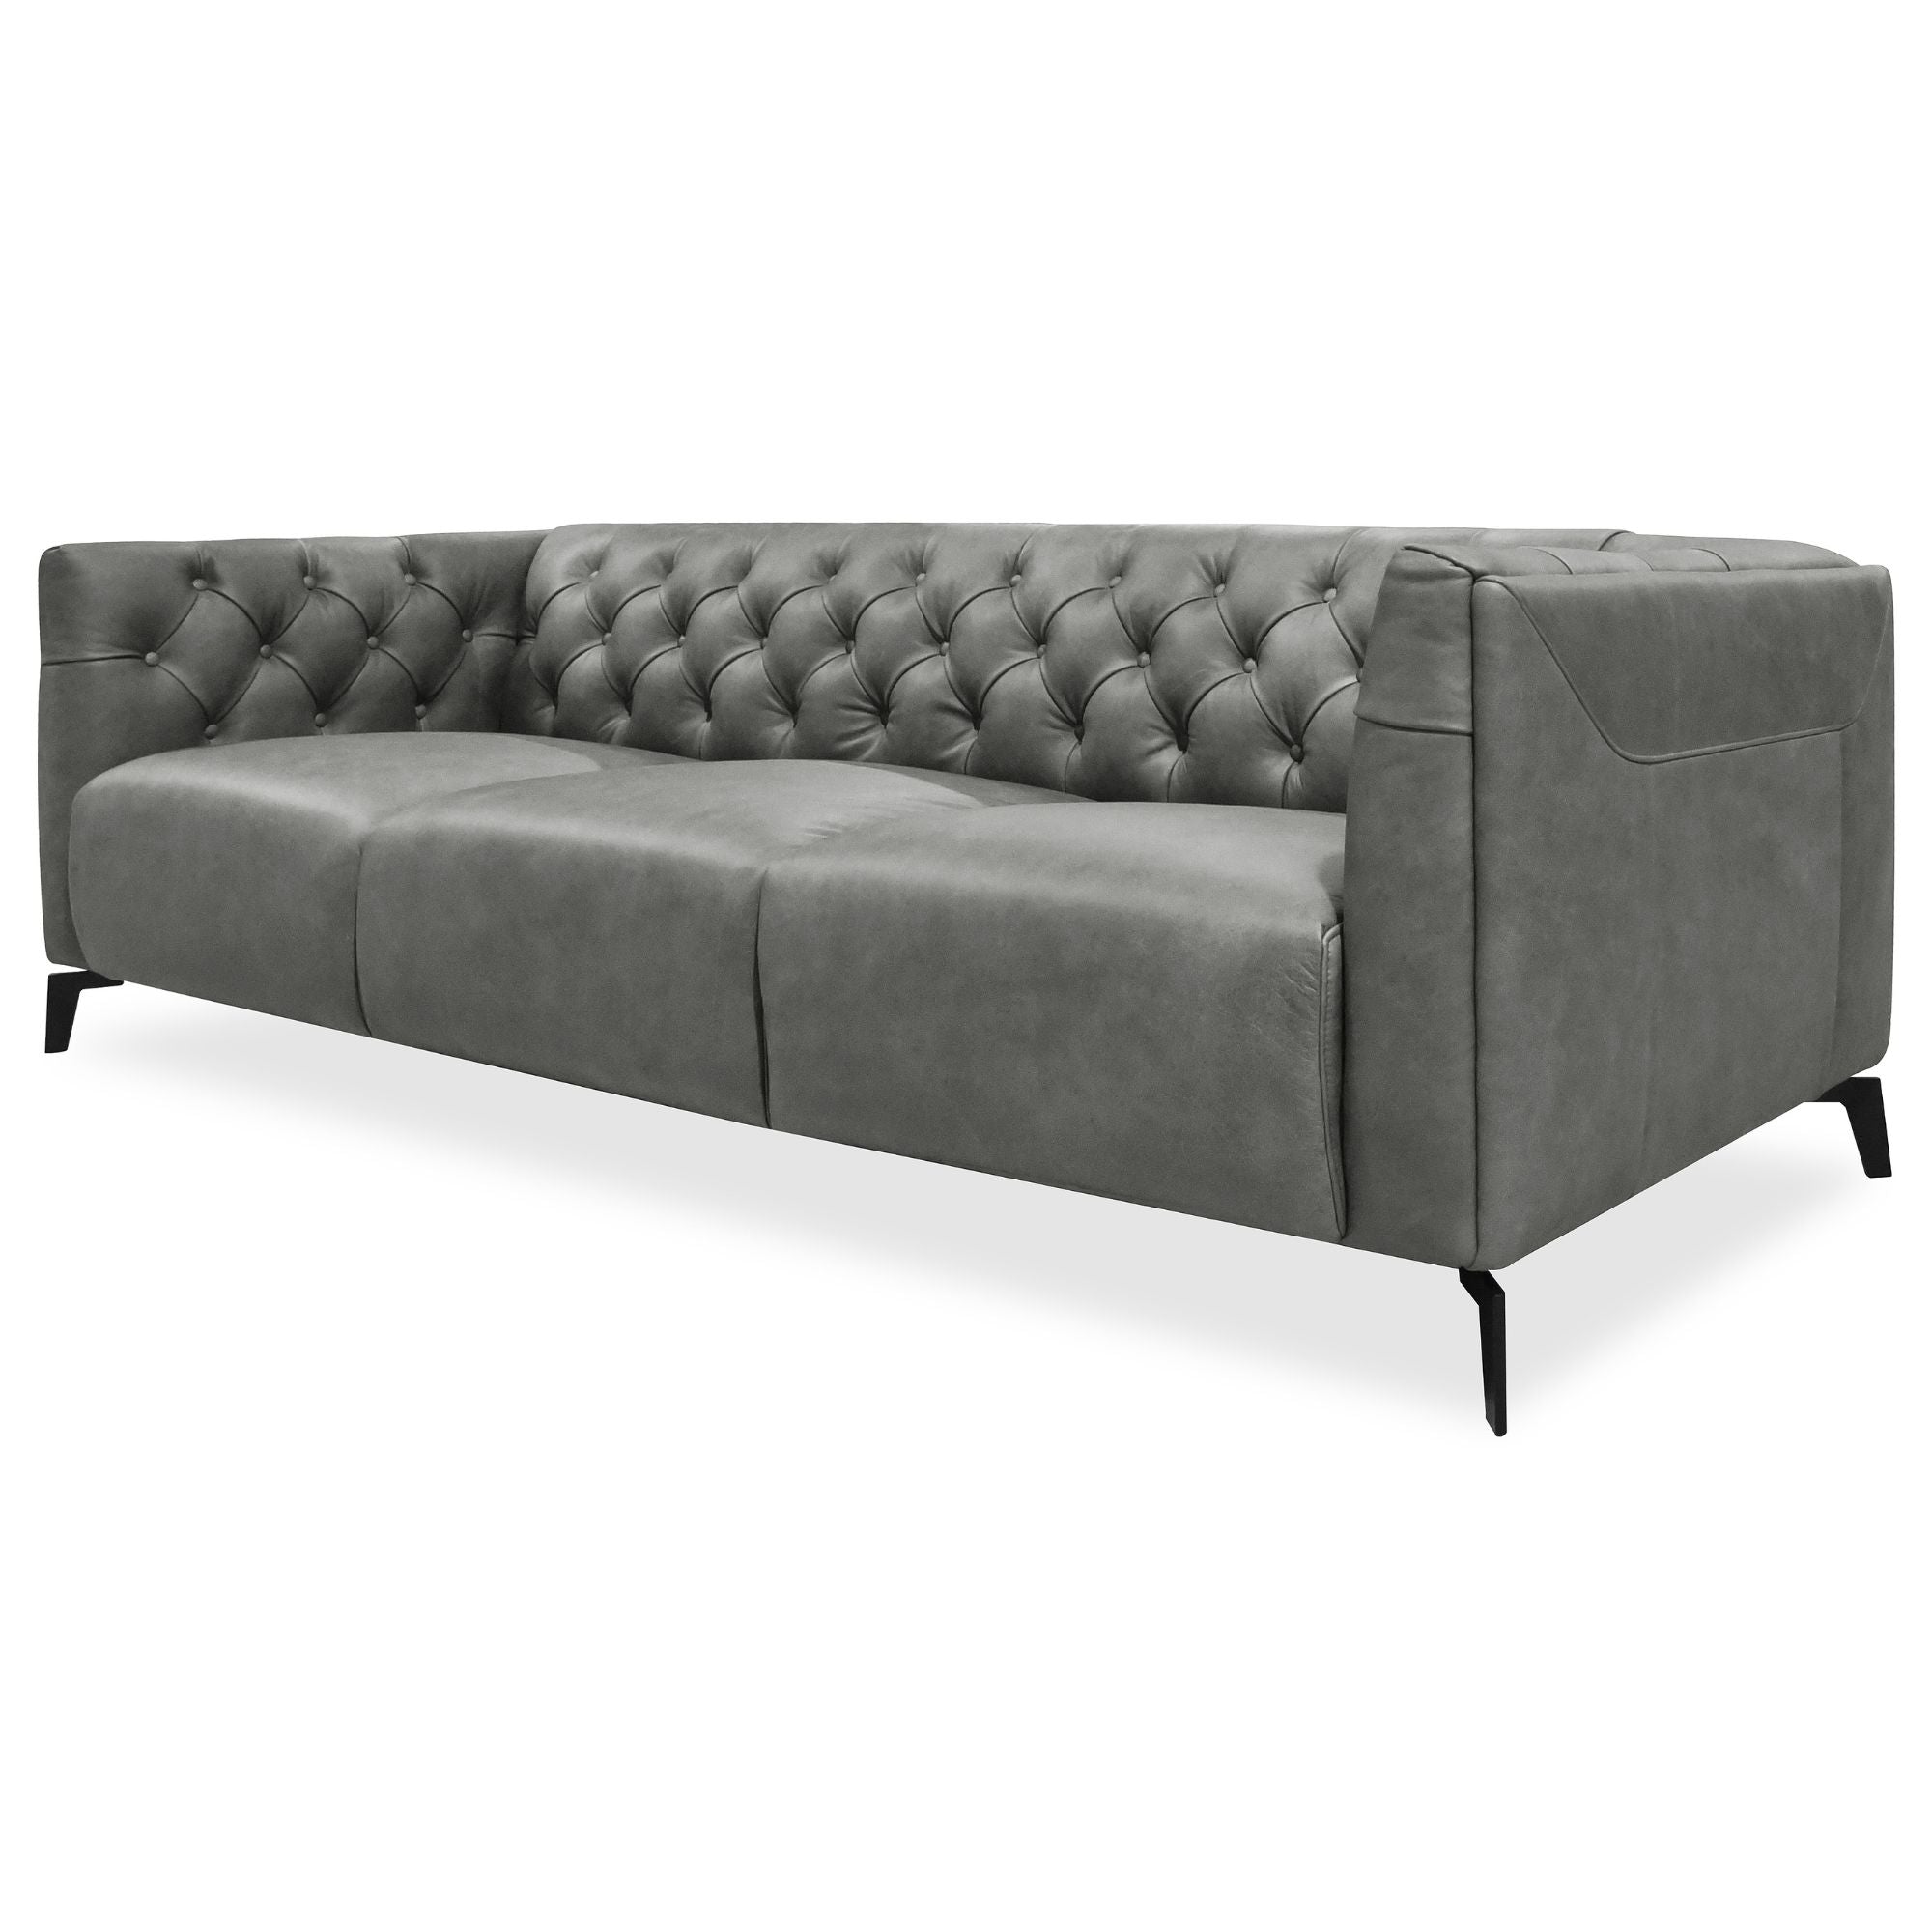 Luxe Genuine Forli Leather Sofa 3.5 Seater Upholstered Lounge Couch - Dark Grey.